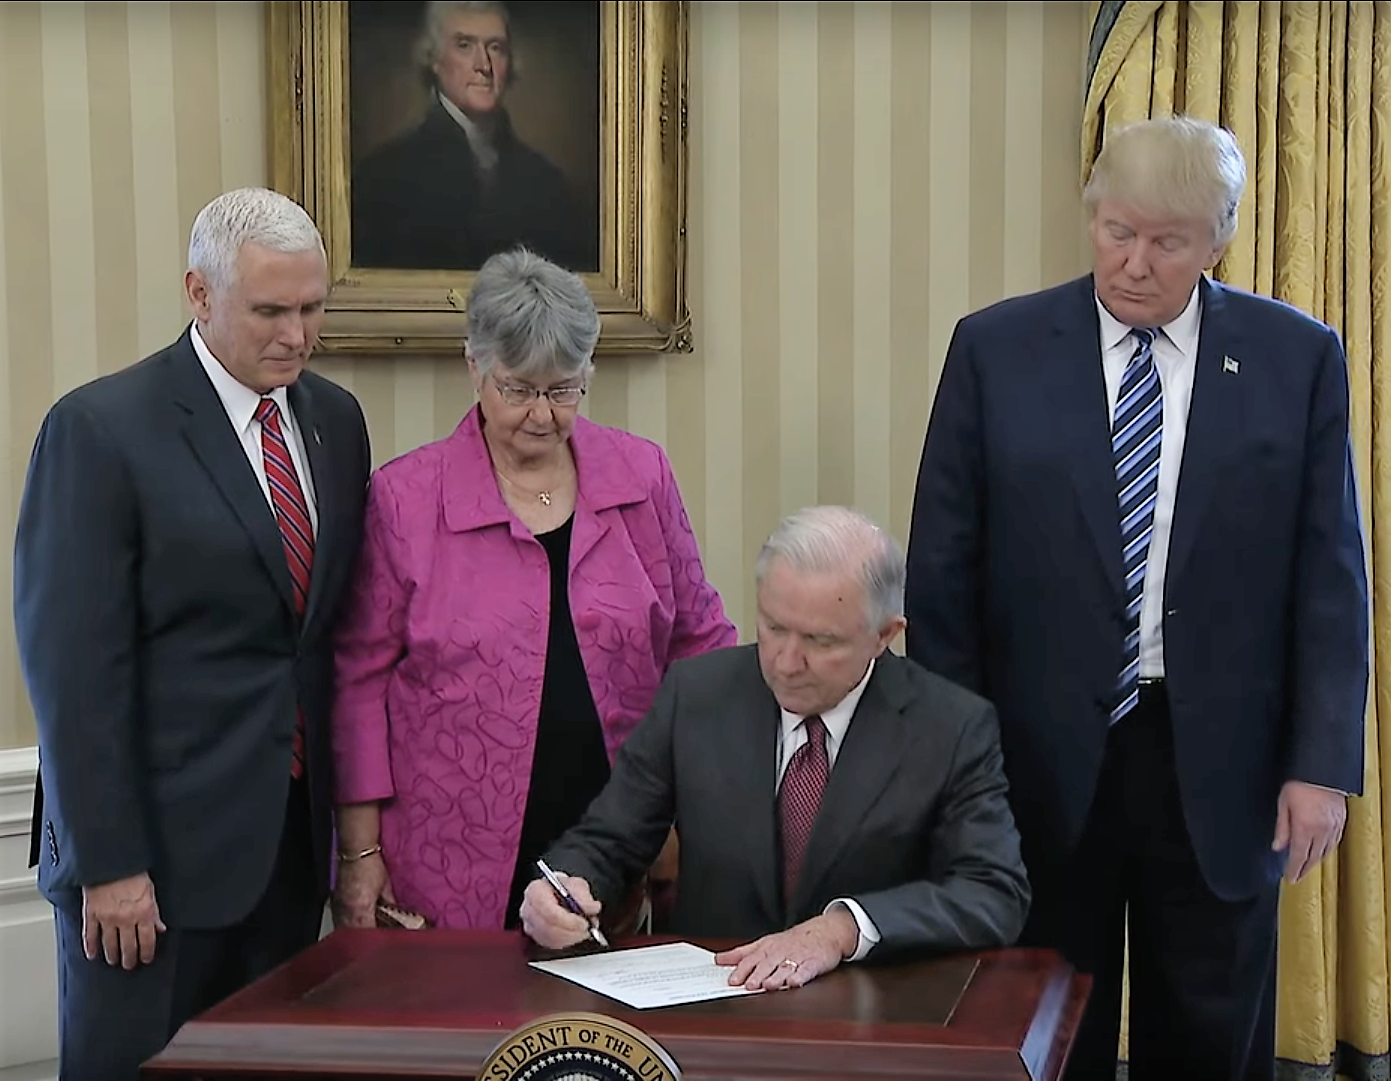 Attorney General Jeff Sessions signs his oath of office with President Trump, Vice President Pence, and his wife Mary.